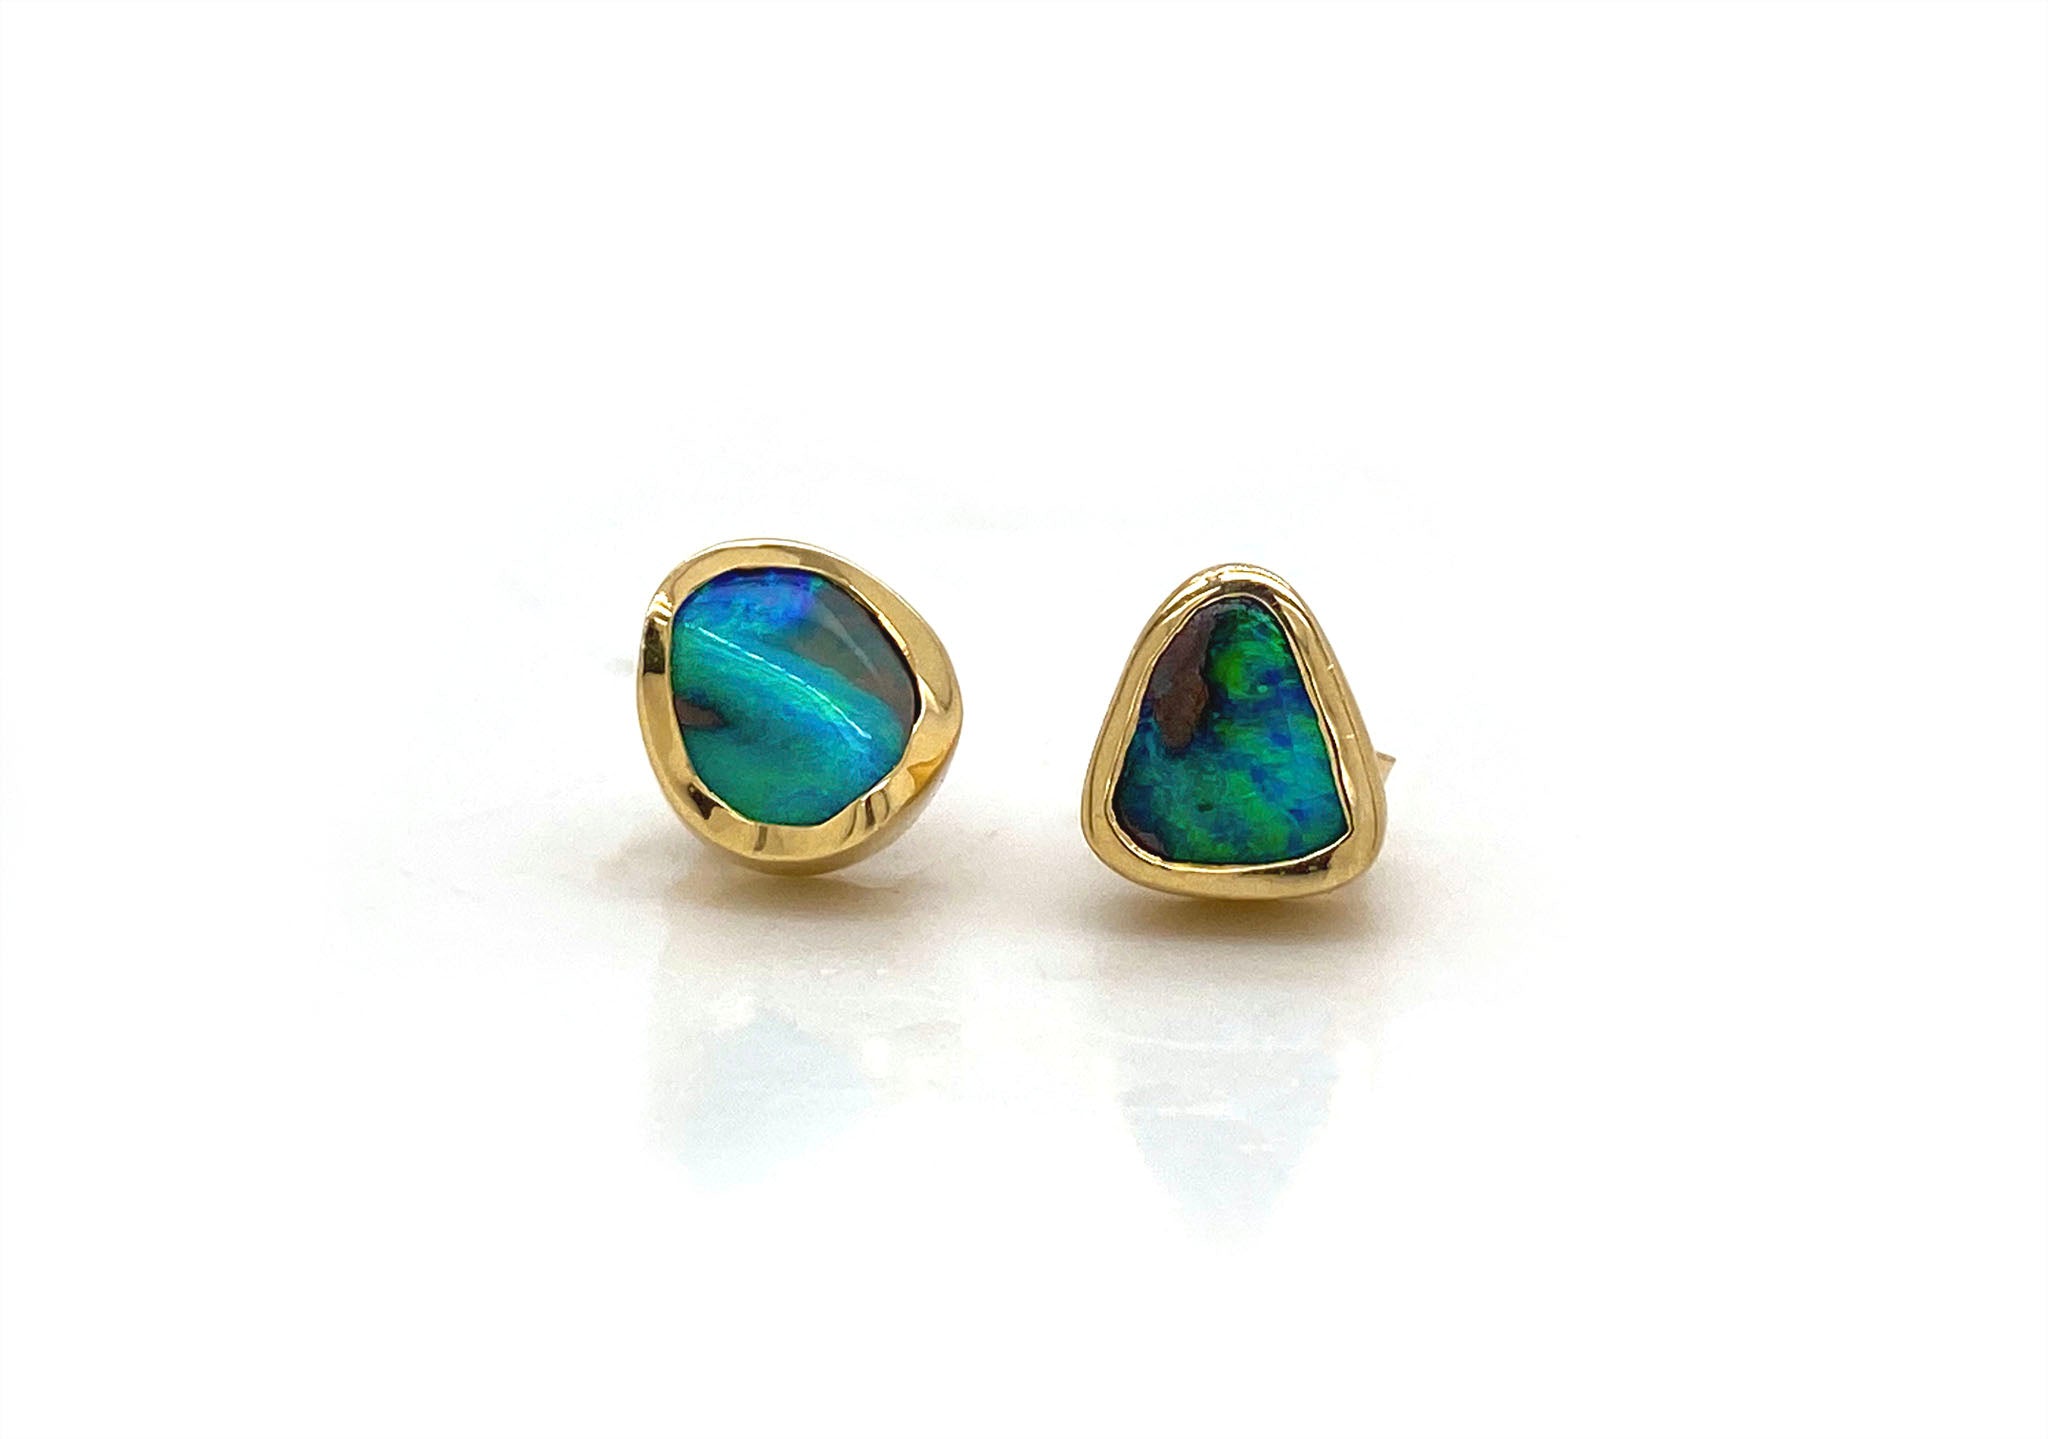 This remarkable pair of hand carved stud earrings showcases two natural Australian boulder opals with  vibrant flashes of oceanic blue and green. These exquisite gems are delicately wrapped in 18kt yellow gold with a luxurious satin finish. These opals are true works of art and will likely become a treasured family heirloom to be handed down form generation to generation. 